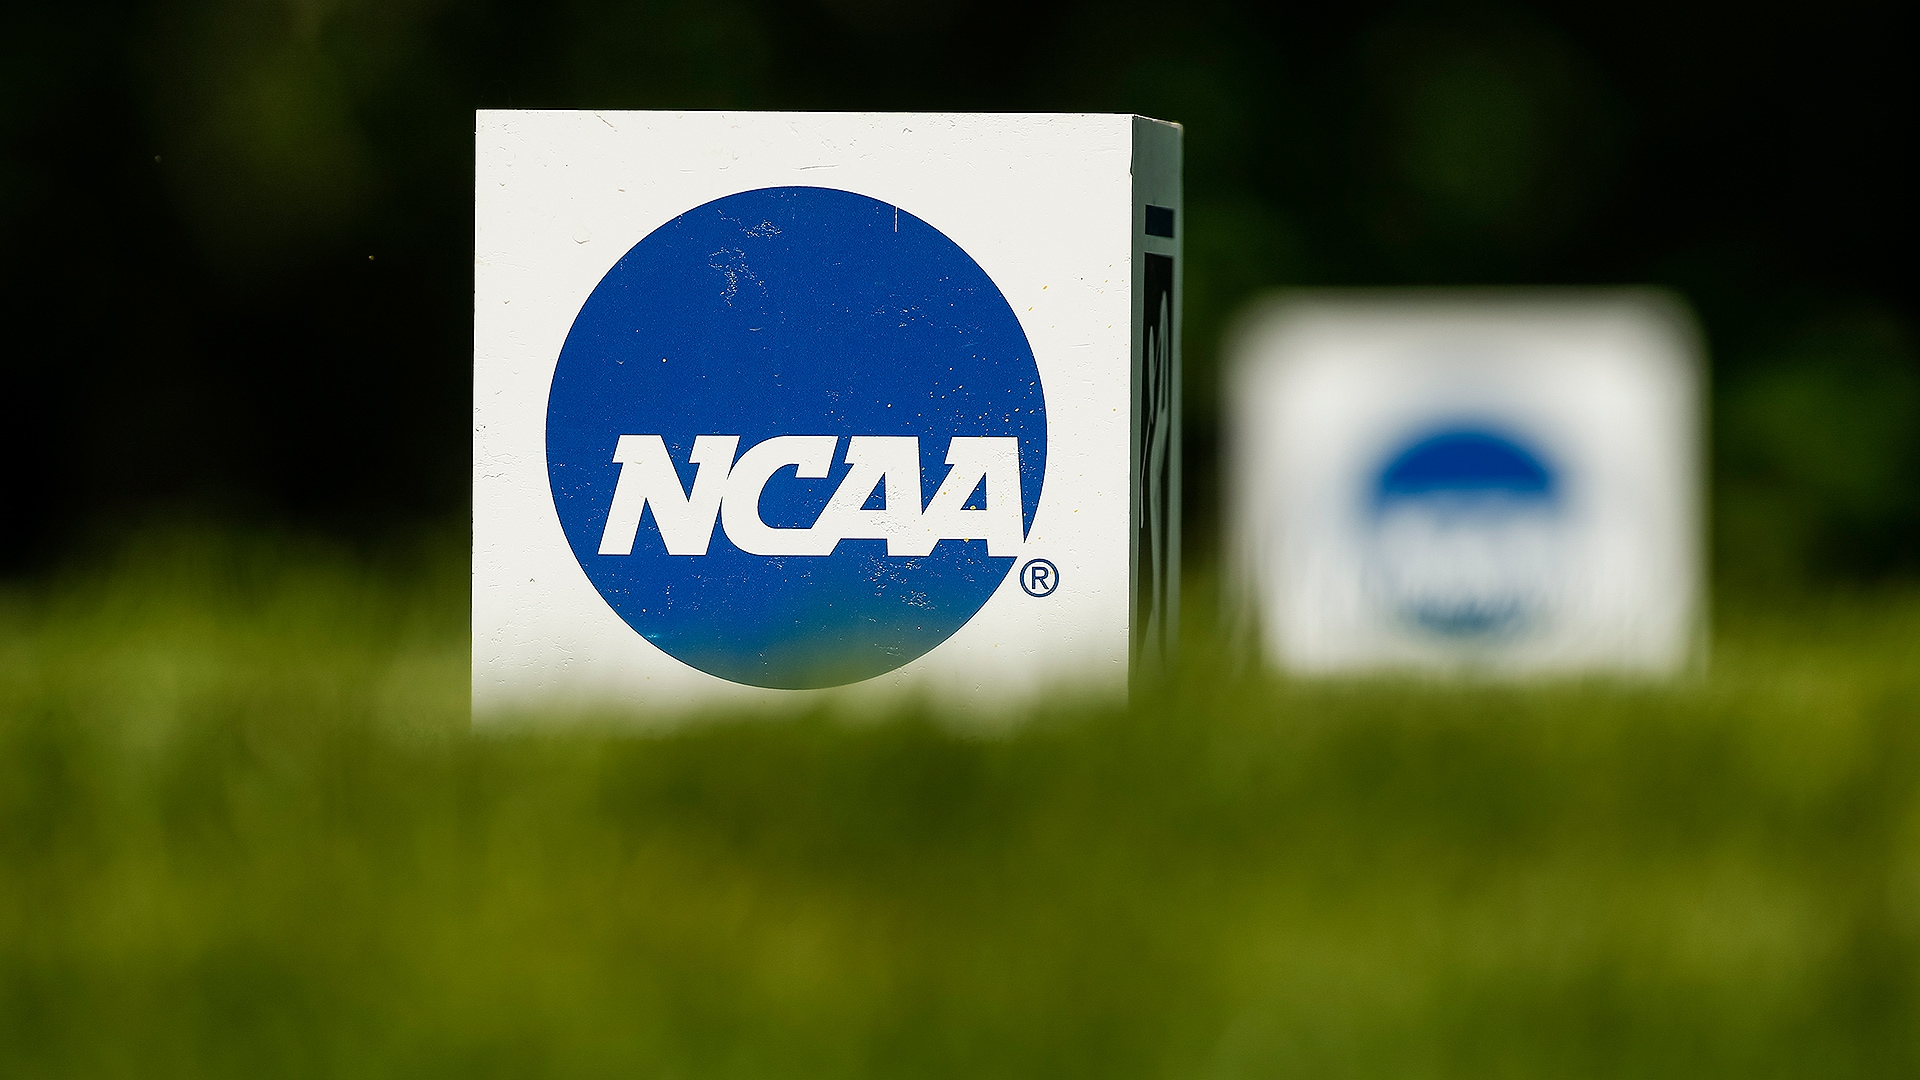 Here are the 30 teams who qualified for NCAA Division I Men’s Golf Championship